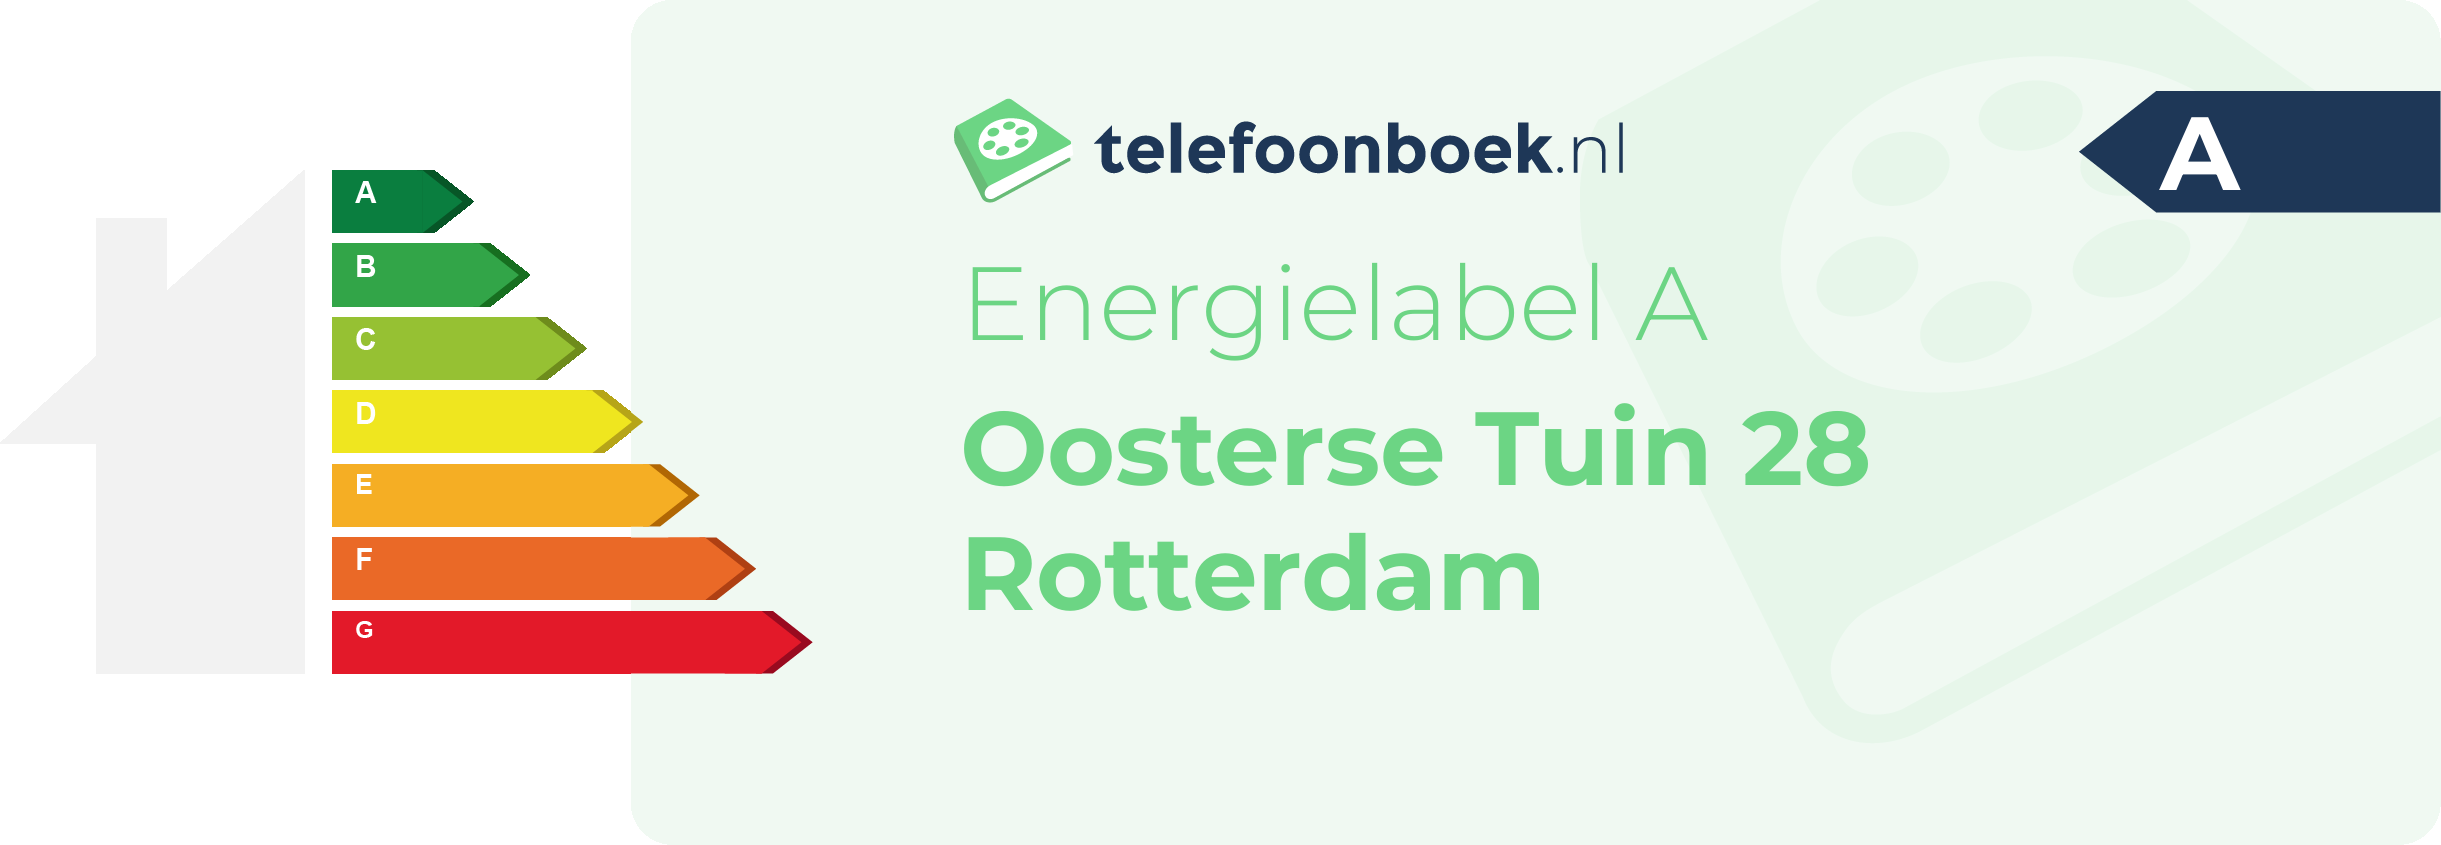 Energielabel Oosterse Tuin 28 Rotterdam